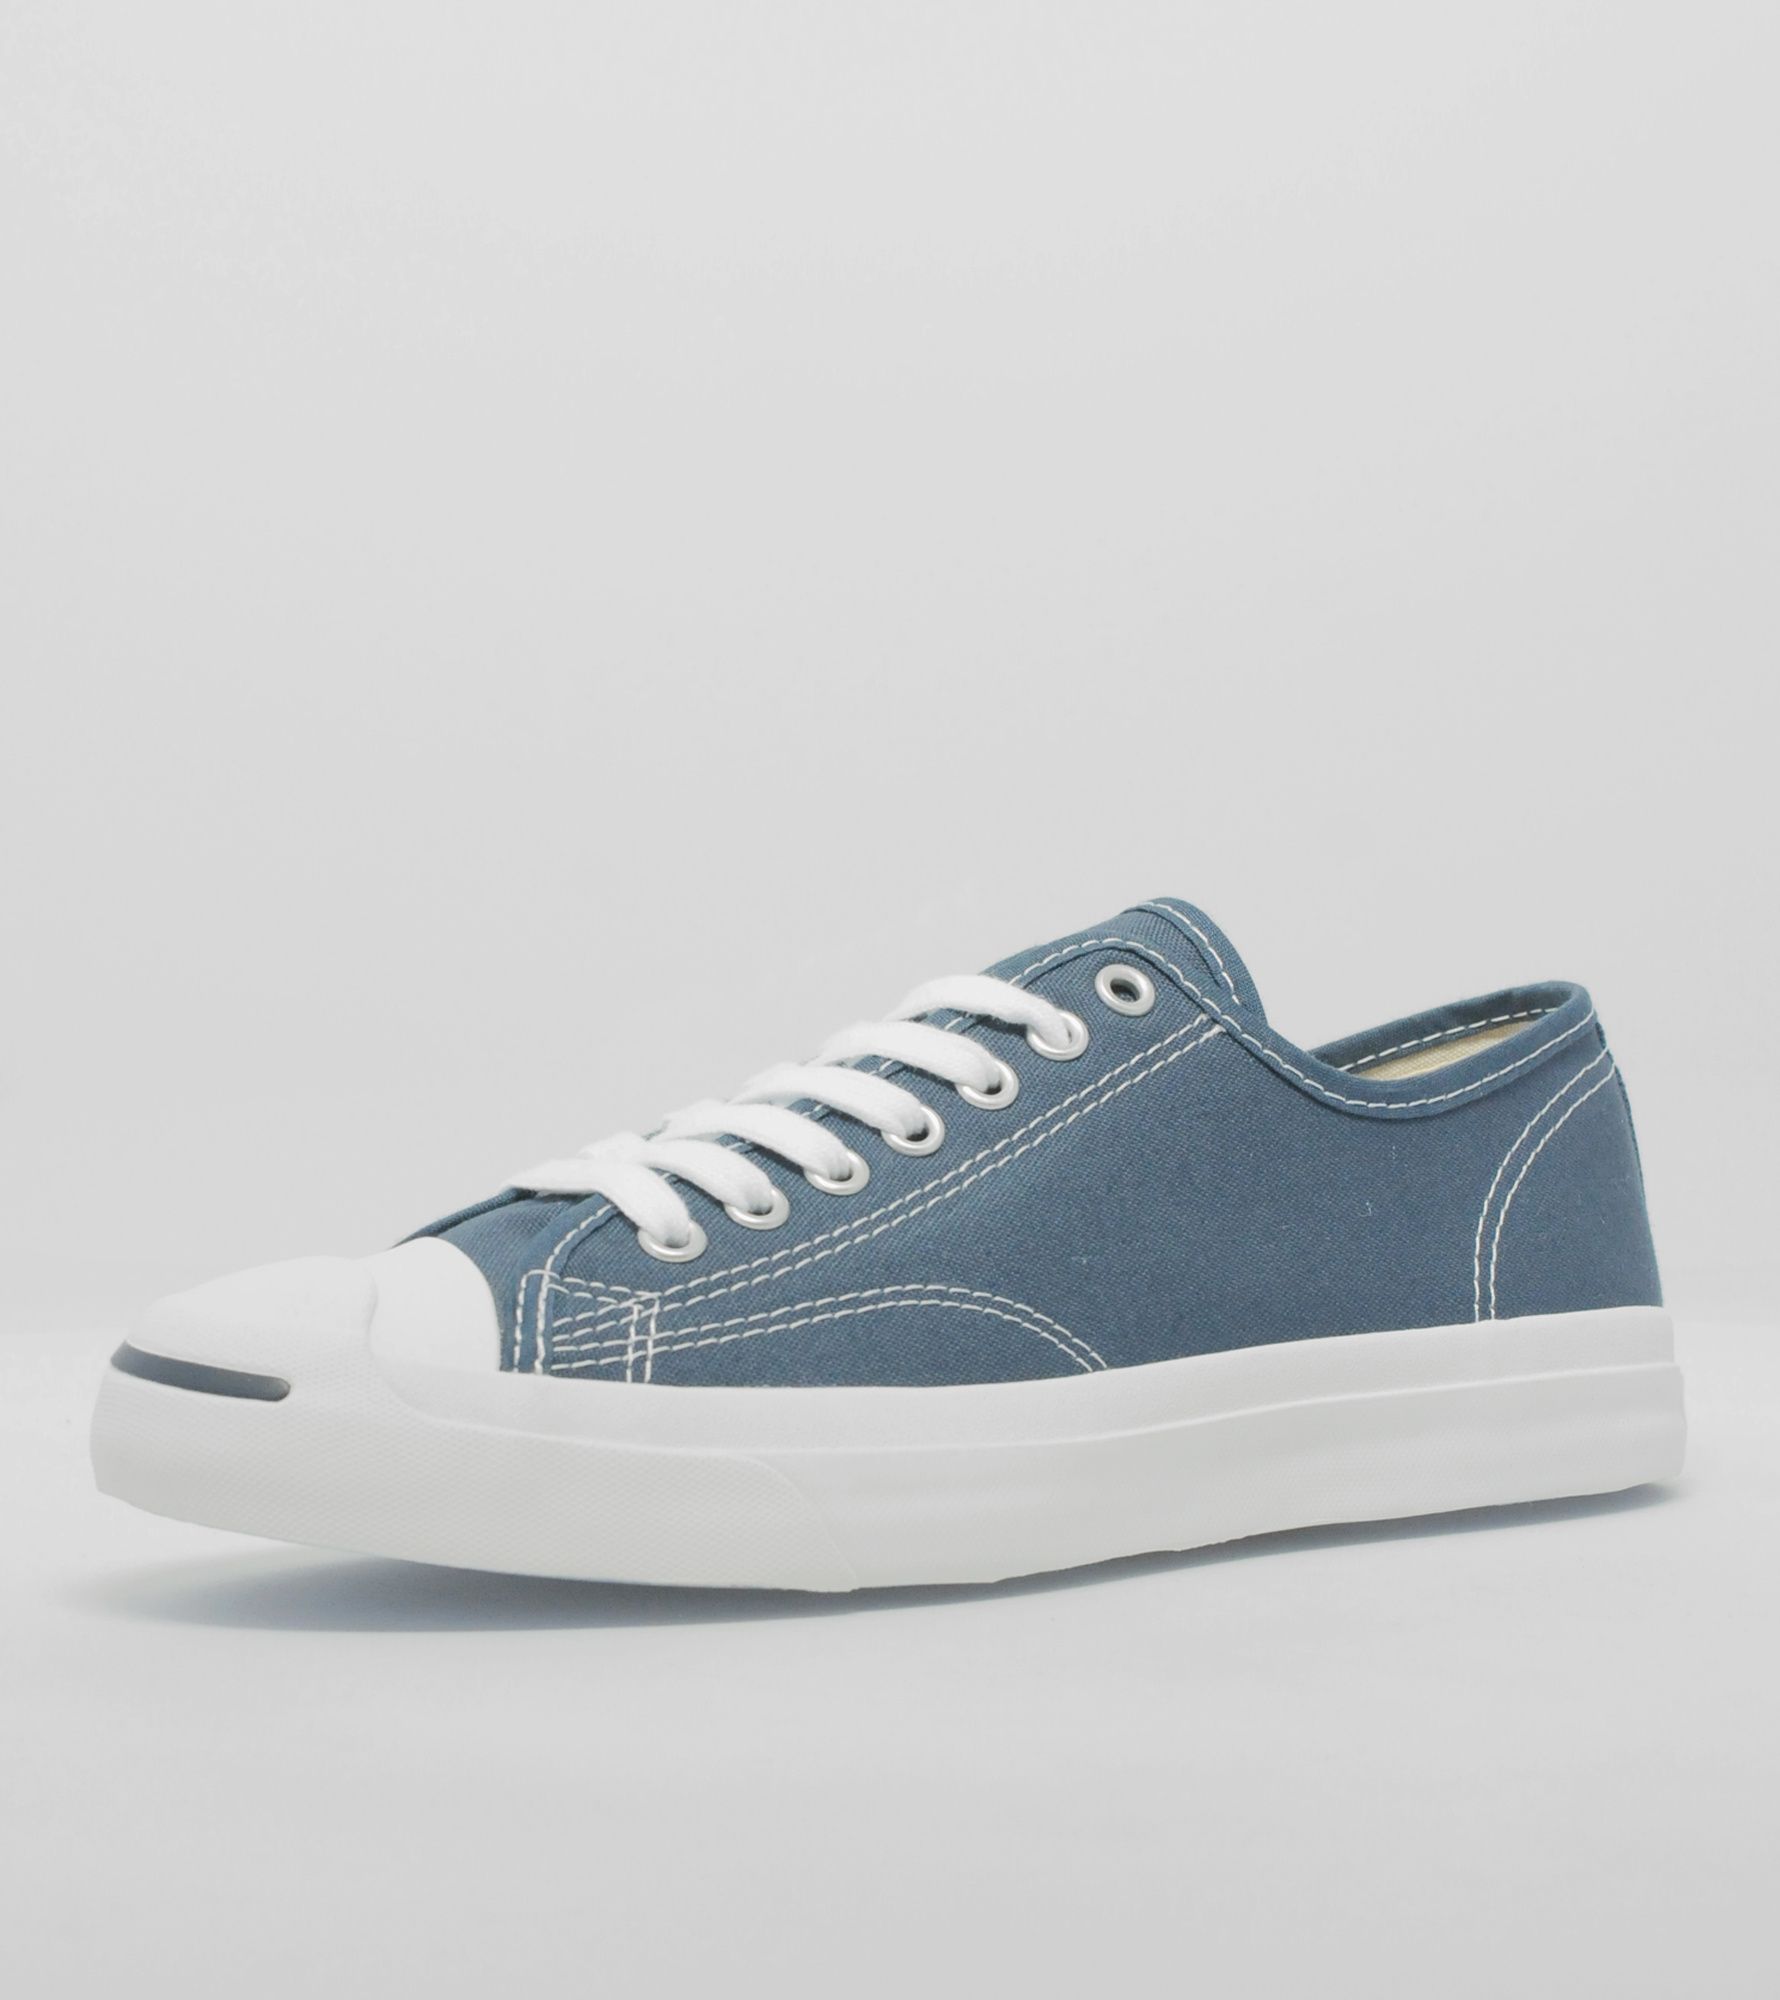 converse-jack-purcell-size